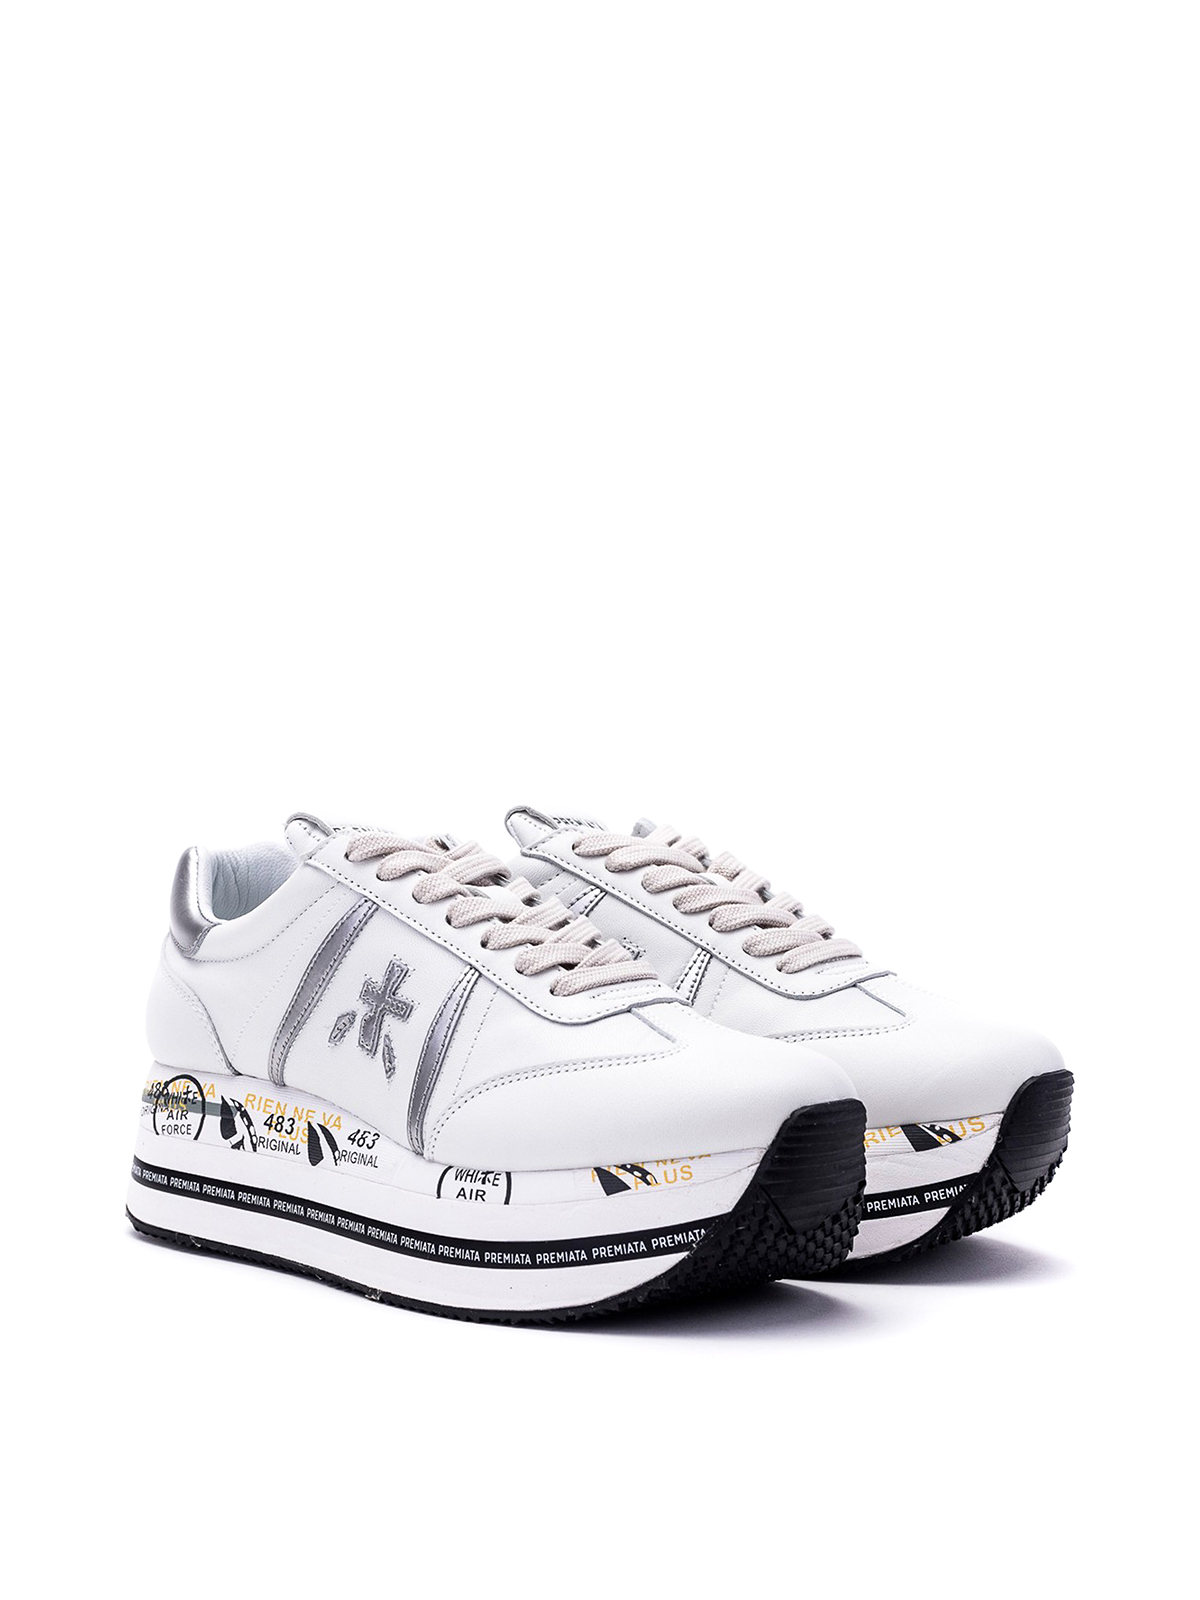 Premiata - Beth sneakers - trainers - BETH4840 | Shop online at iKRIX